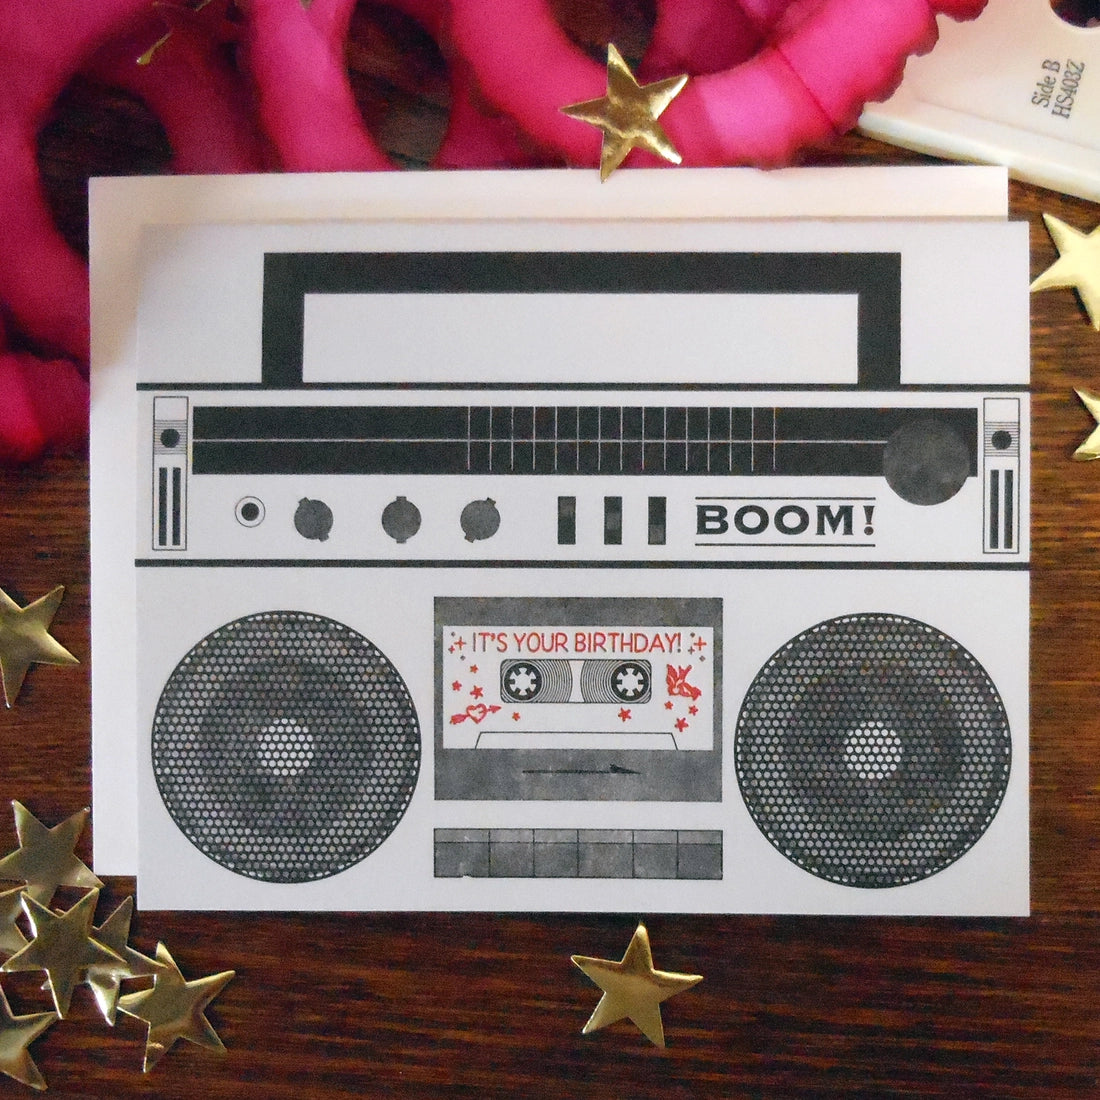 Boom! It's Your Birthday Card